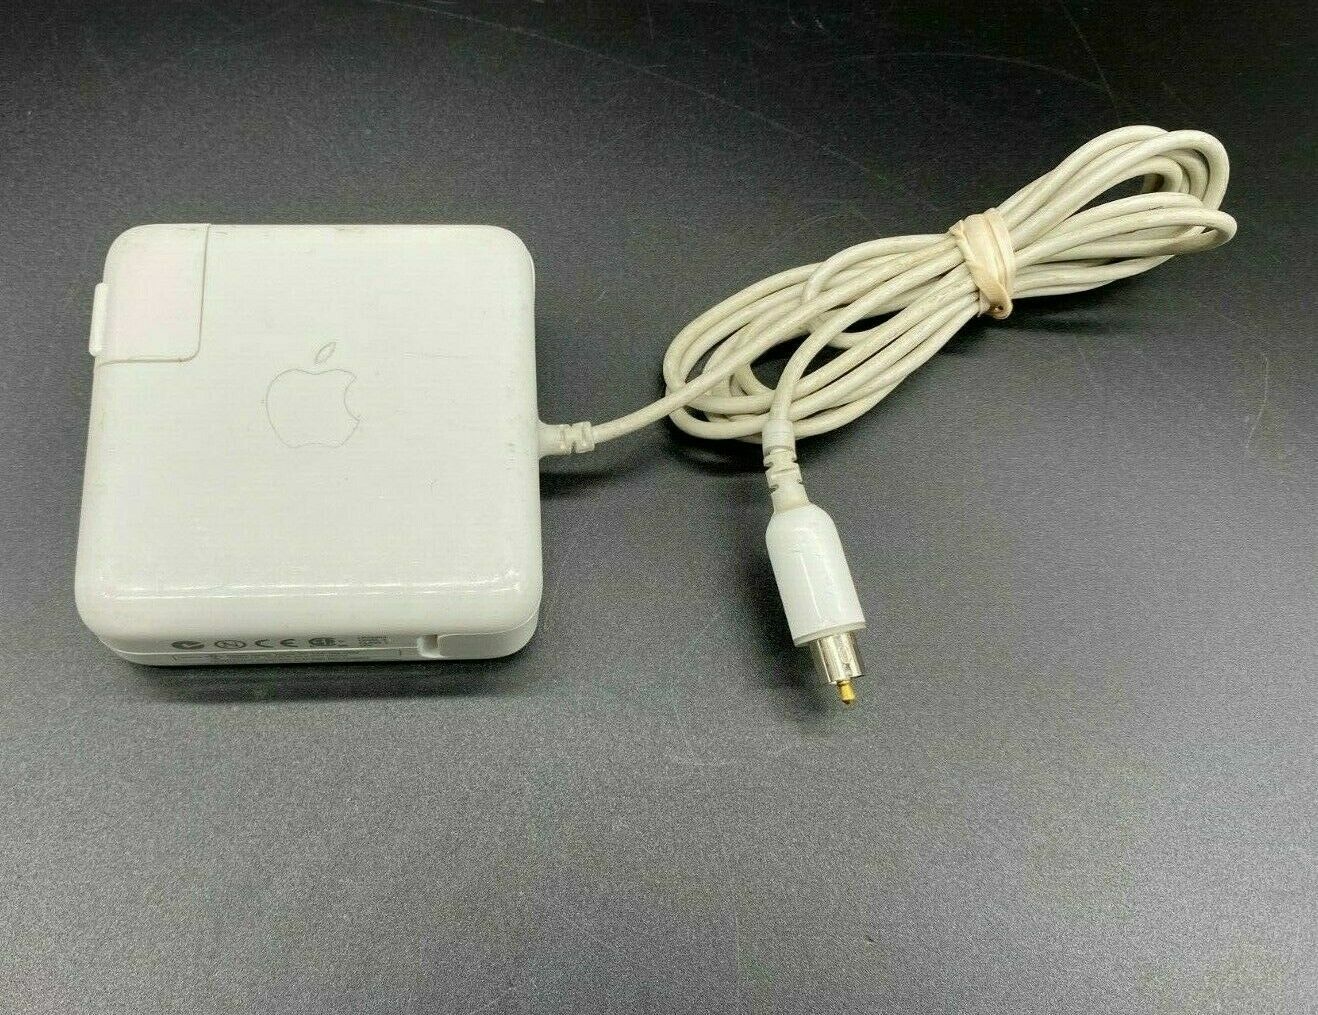 Genuine Apple iBook G3 G4 PowerBook Power Adapter Charger 45W A1036 M8482 